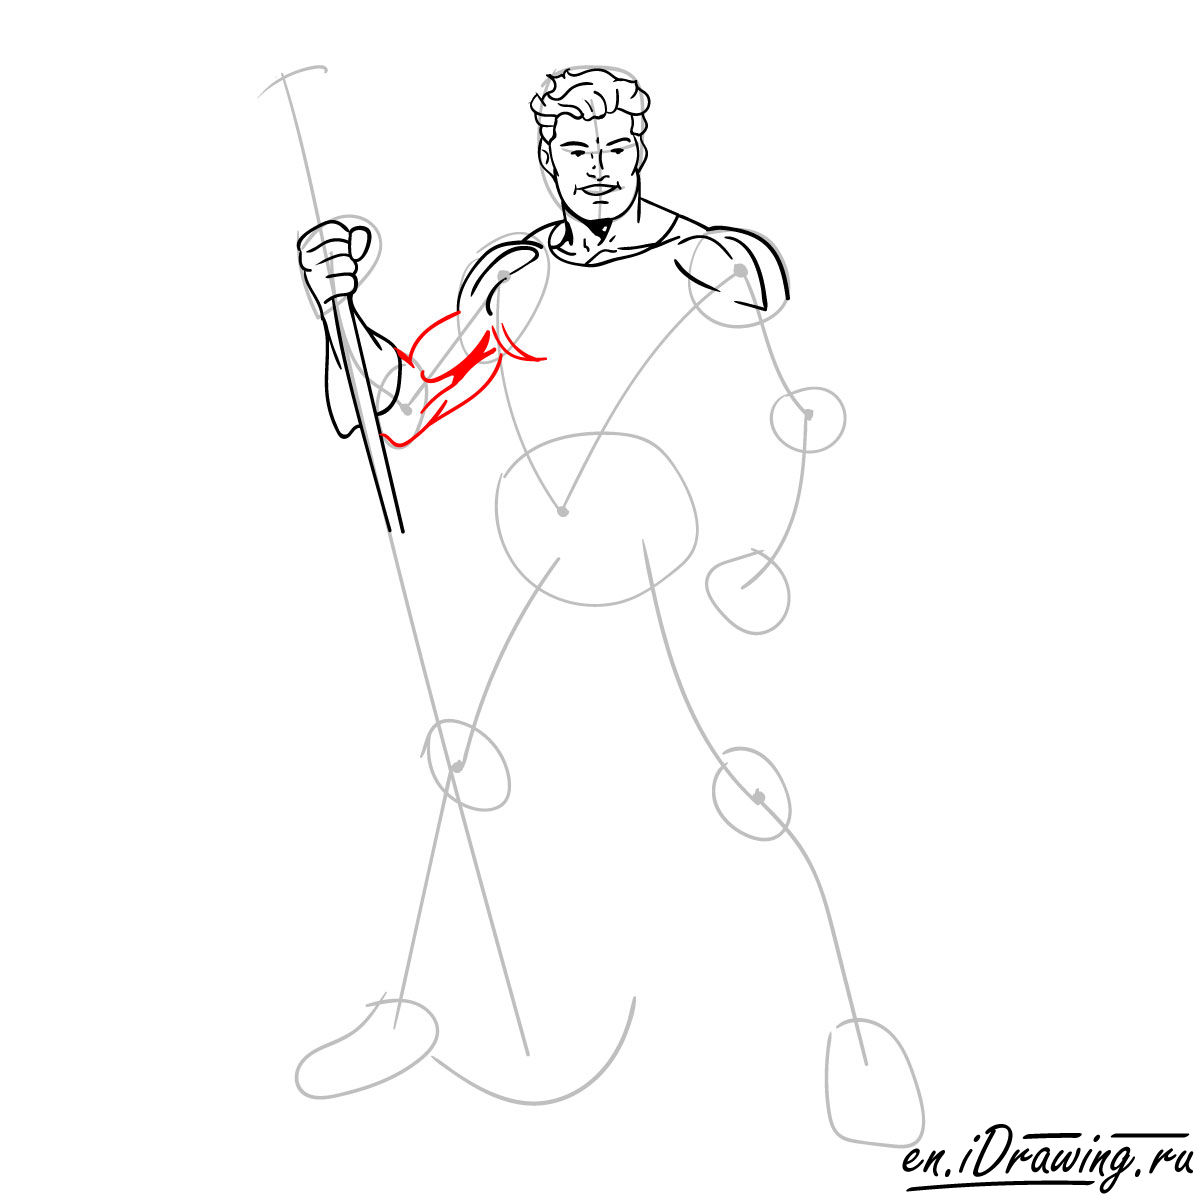 How to draw Aquaman from cartoons and comic books - step 08